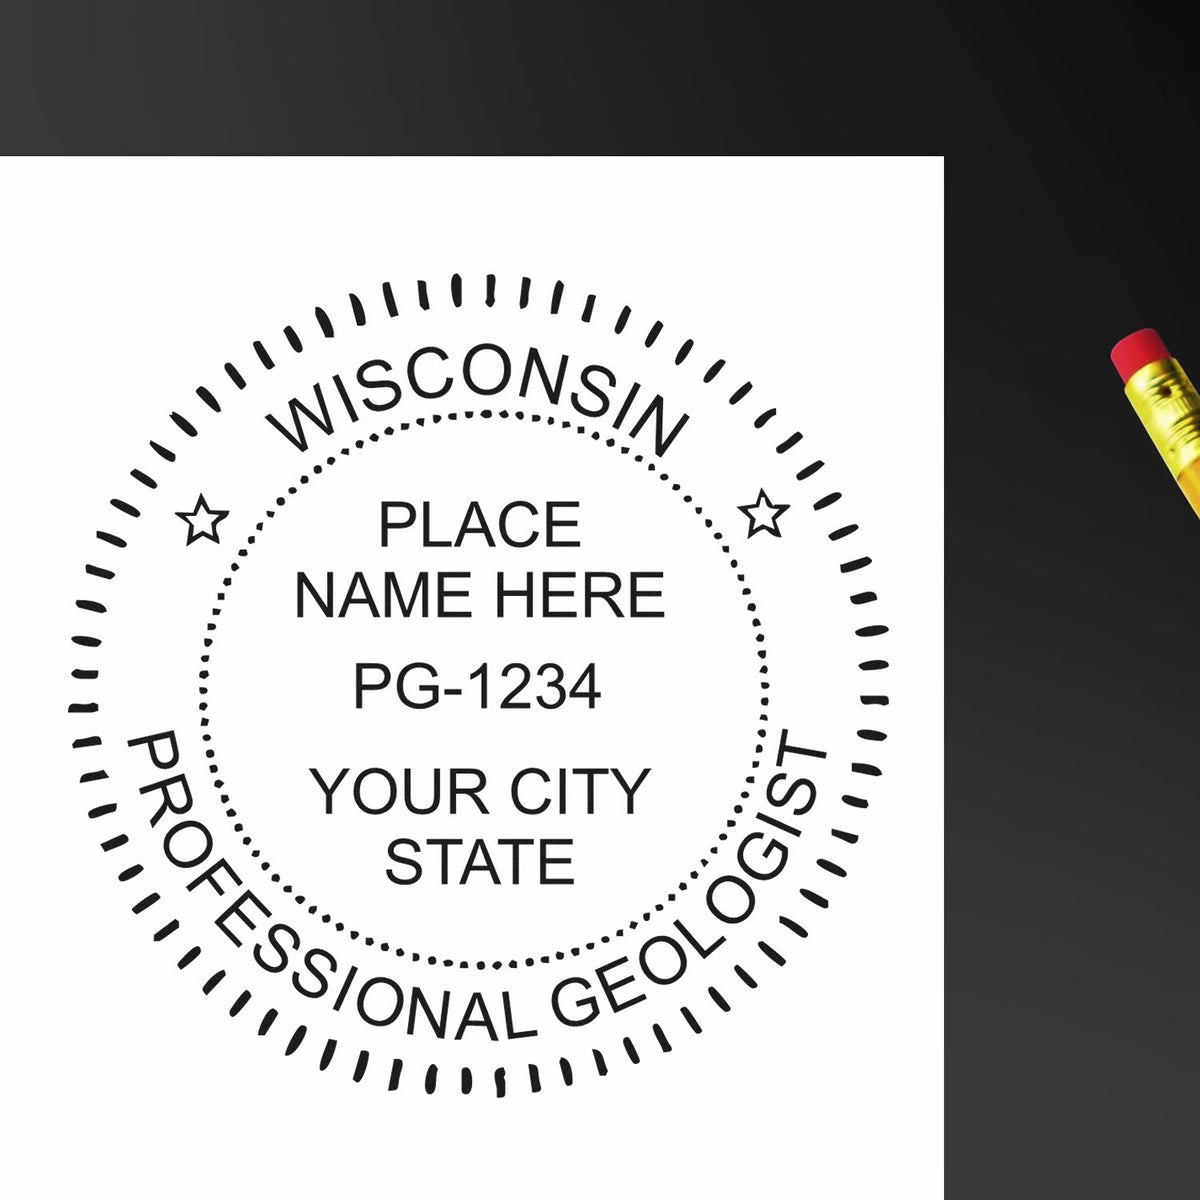 A photograph of the Digital Wisconsin Geologist Stamp, Electronic Seal for Wisconsin Geologist stamp impression reveals a vivid, professional image of the on paper.